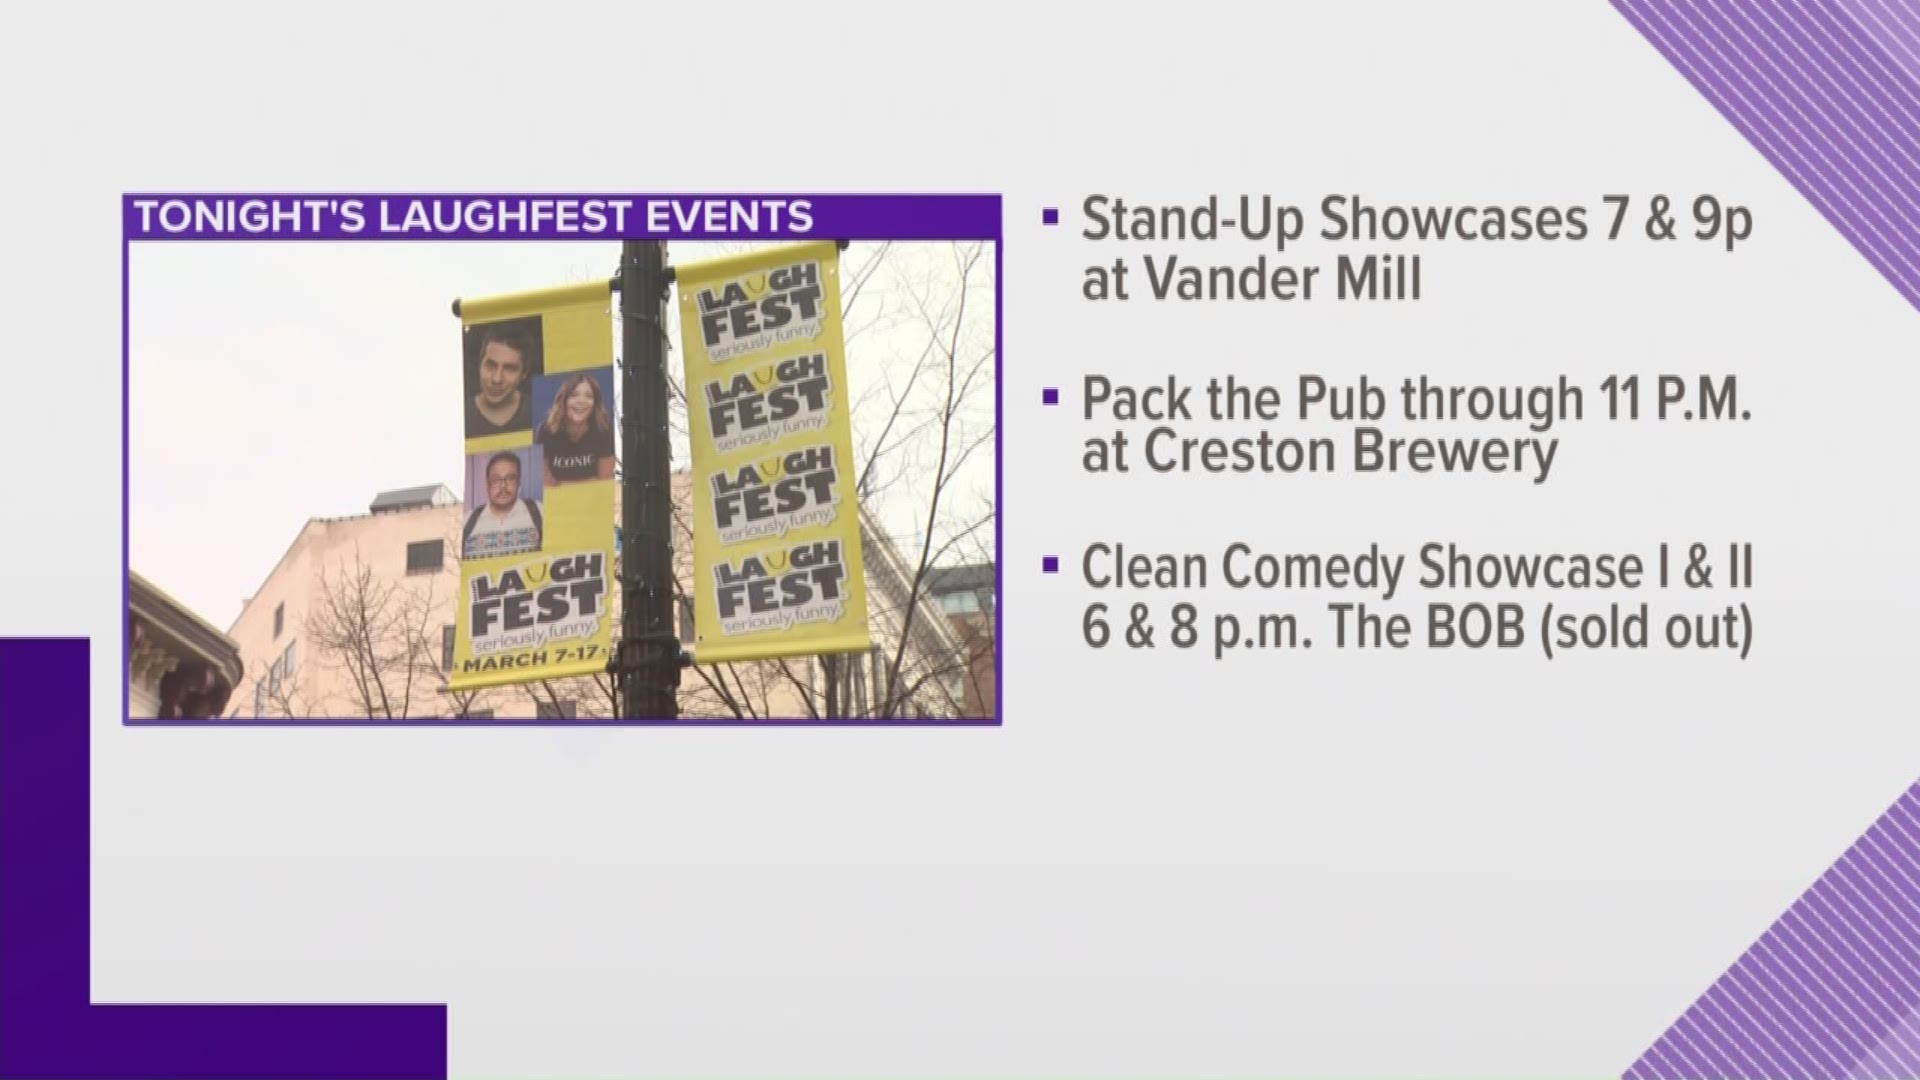 LaughFest 2019 is underway. The 10 day festival highlights comedy in all ways, from standup and improv, to showcases and classes.